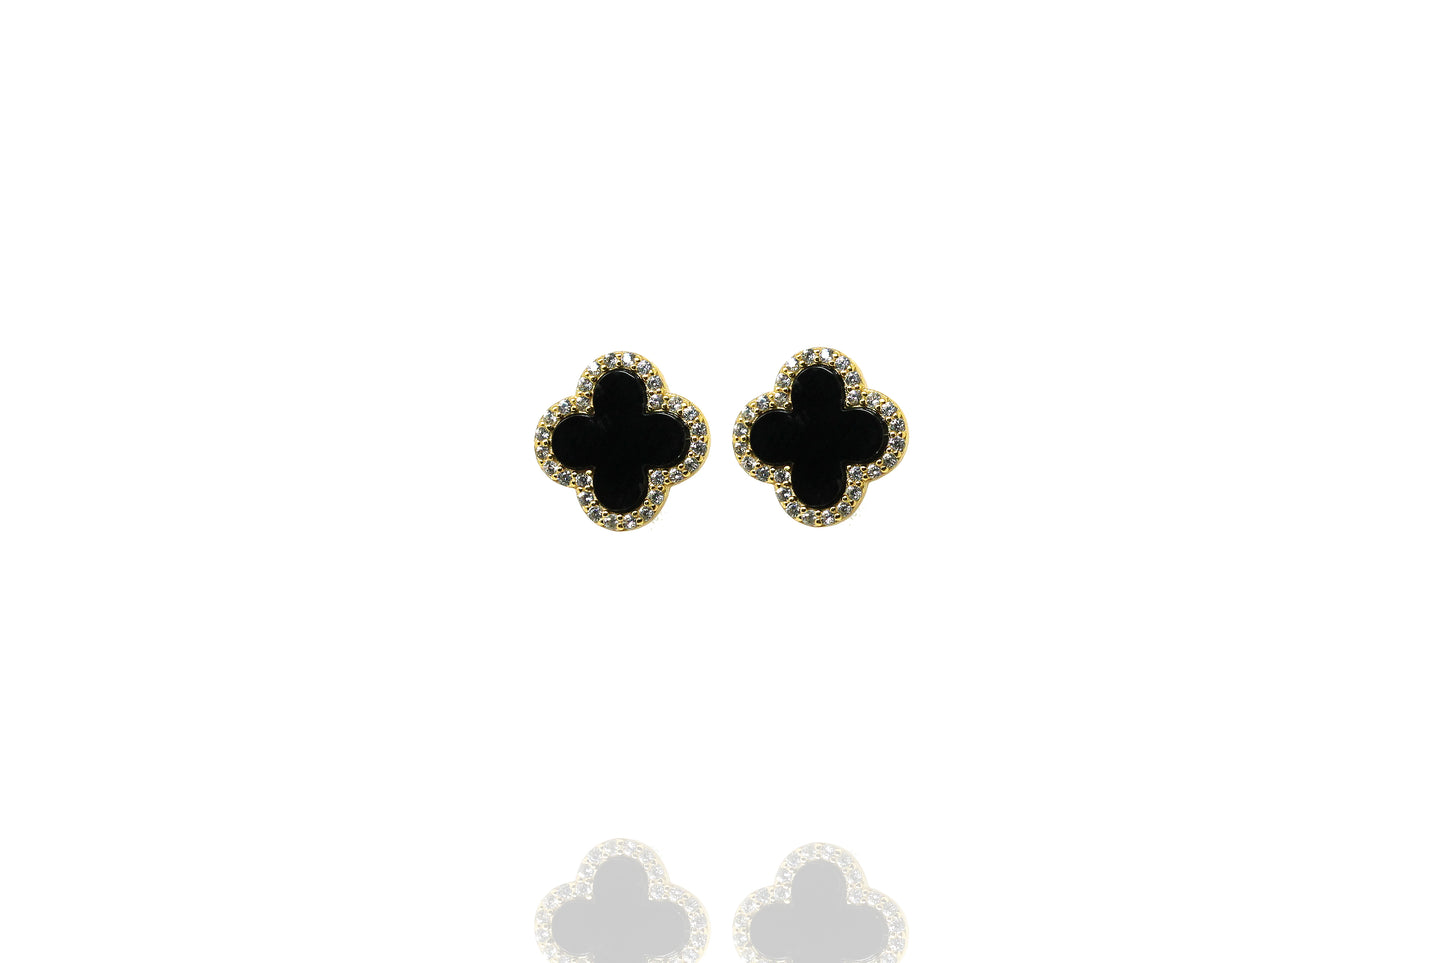 EK-71/G0 - Large Stud Earring in Onyx Set in Gold with cz